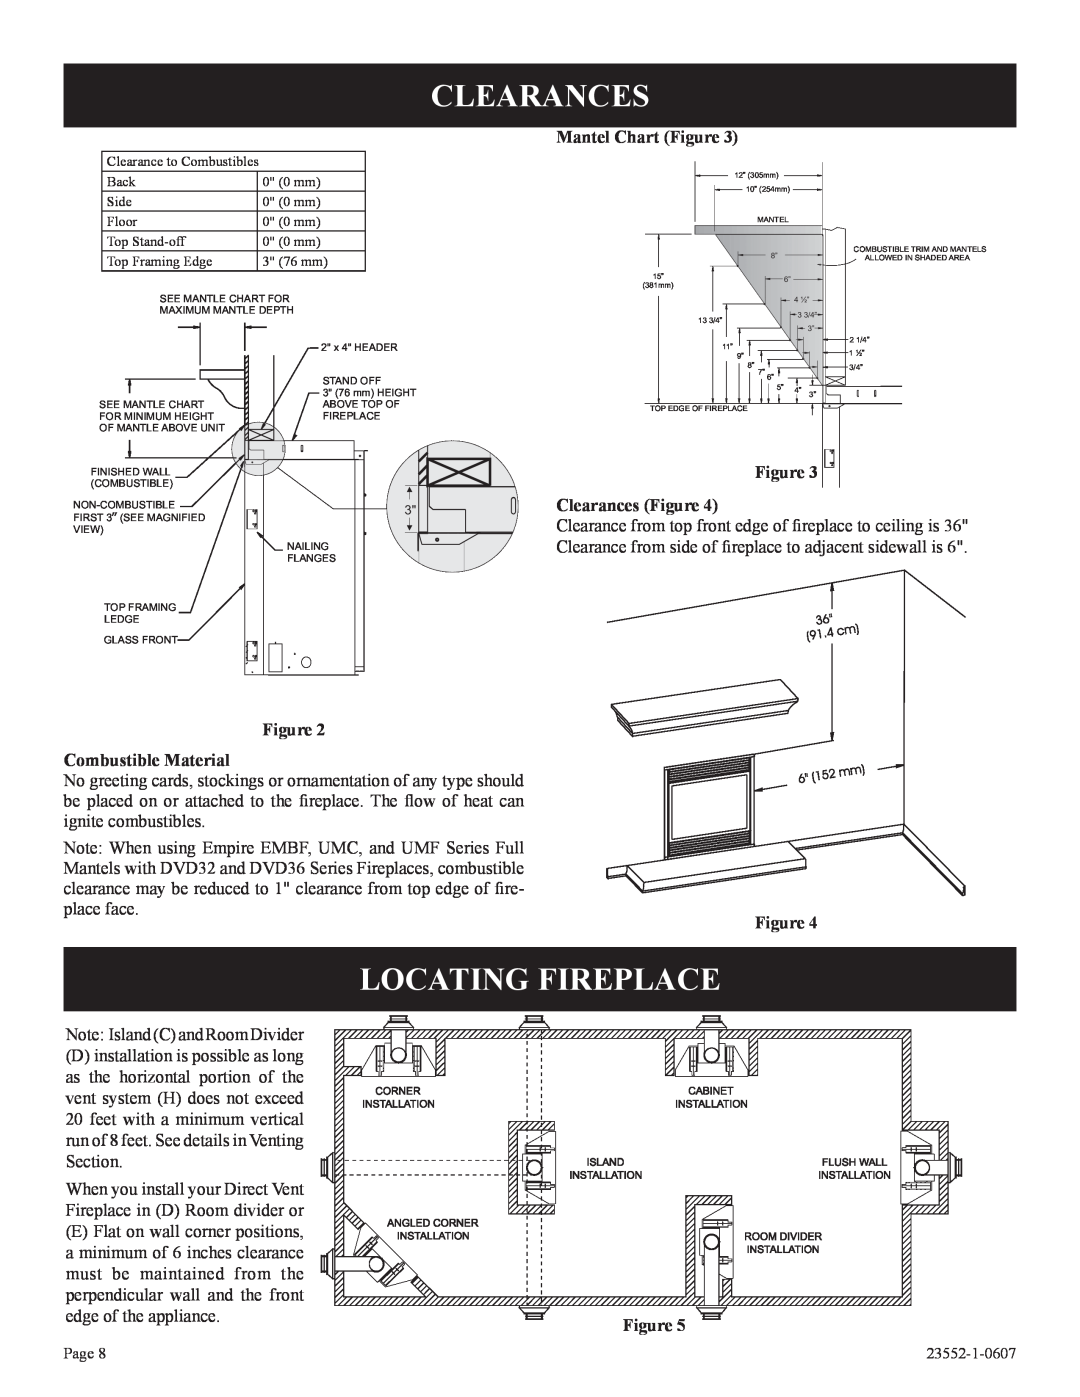 Empire Comfort Systems DVD48FP3, DVD42FP5, DVD48FP5 Locating Fireplace, Mantel Chart Figure, Figure Clearances Figure 